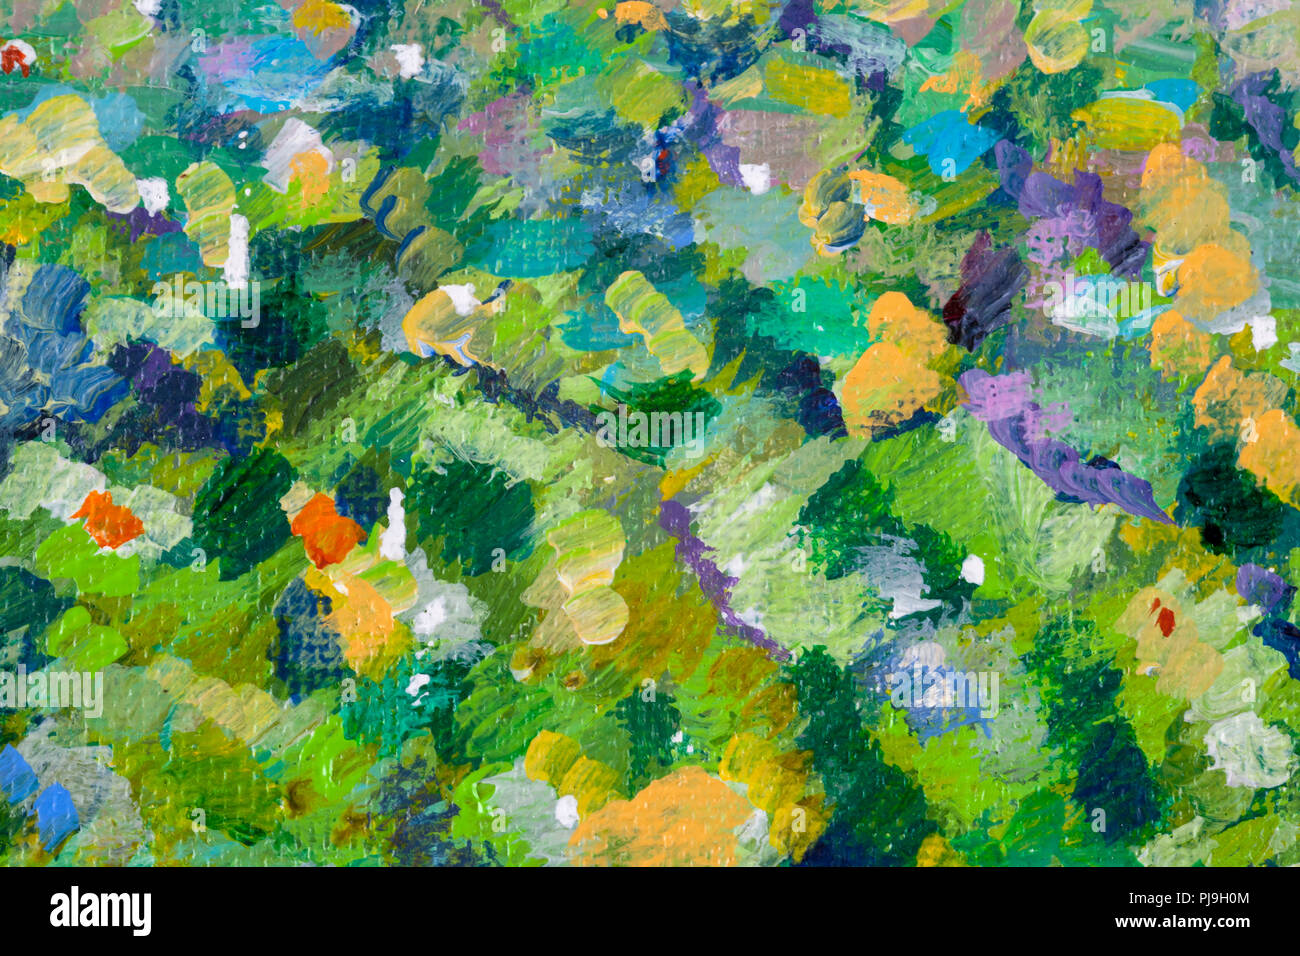 Details of acrylic paintings showing colour, textures and techniques.  Expressionistic woodland trees. Stock Photo